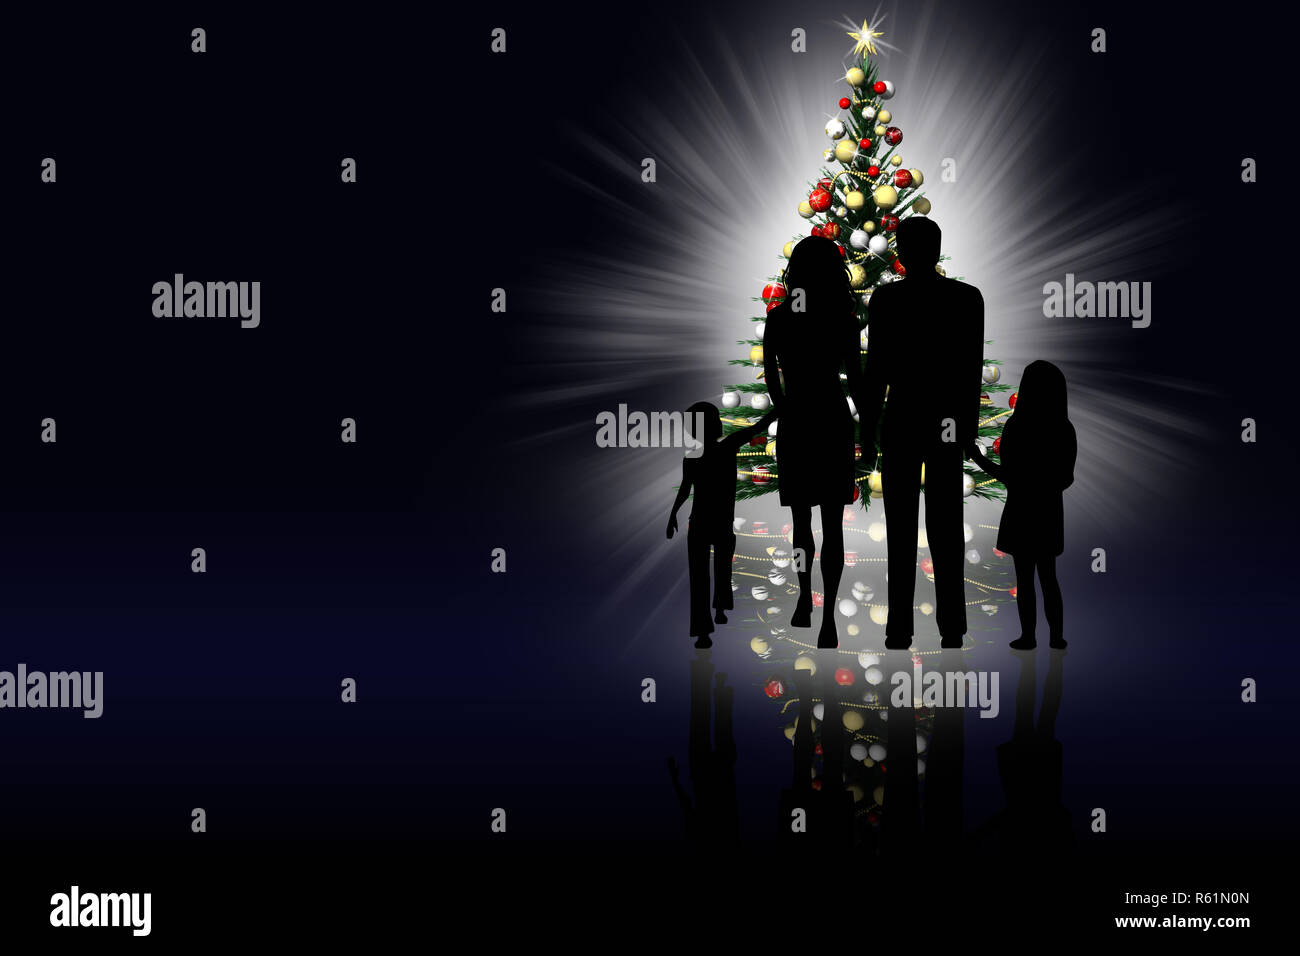 3D illustration. Family silhouette with background Christmas tree. Stock Photo